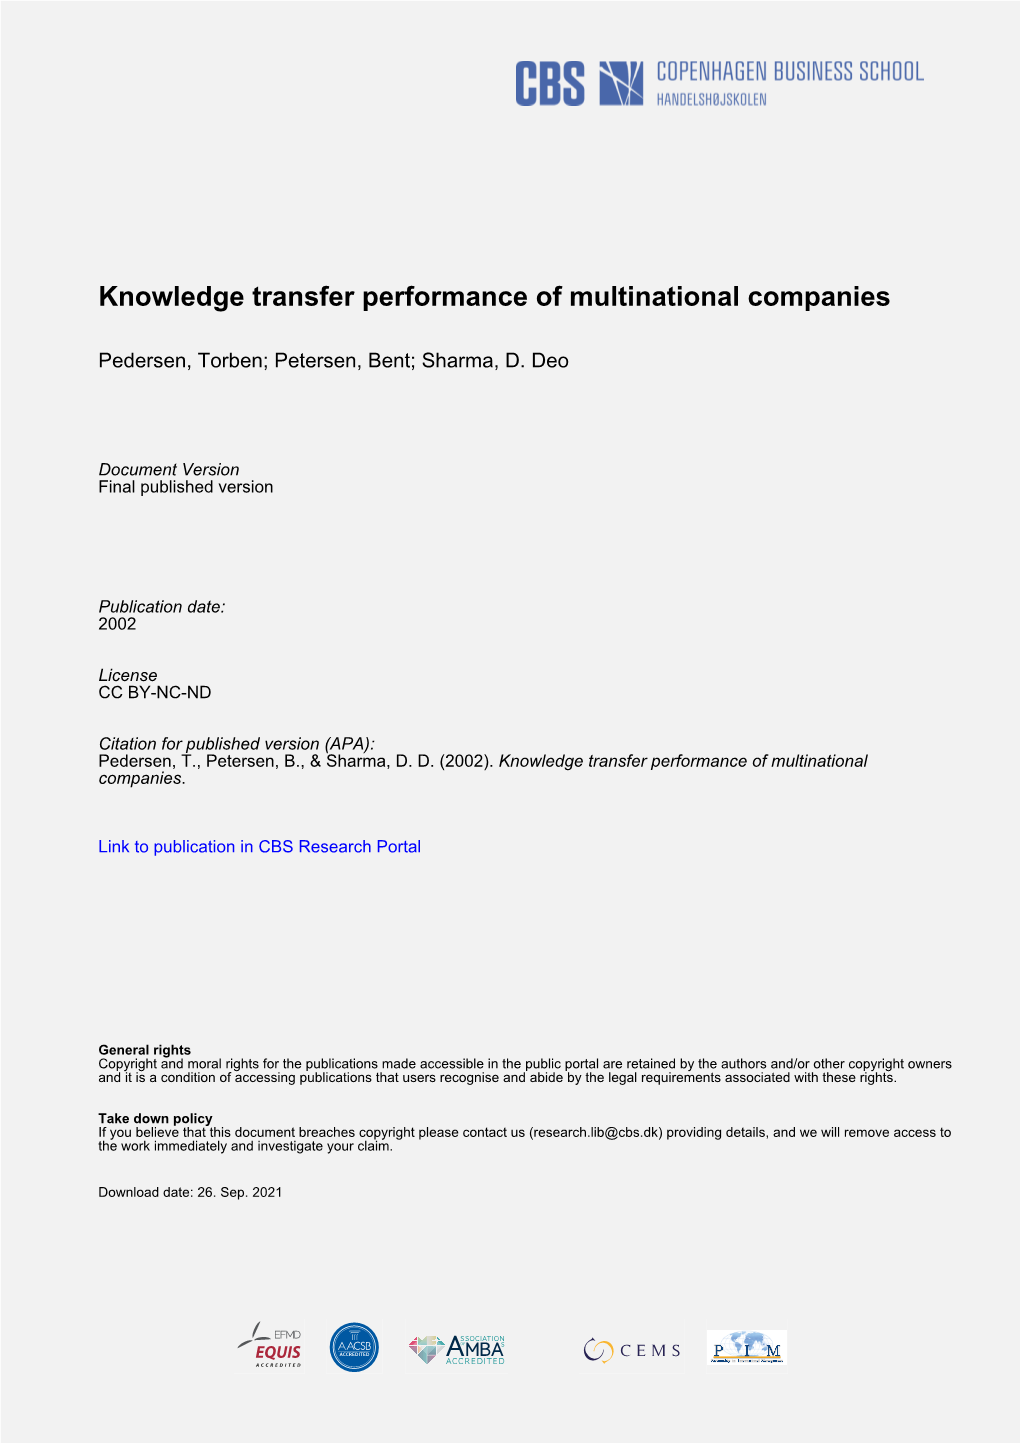 Knowledge Transfer Performance of Multinational Companies